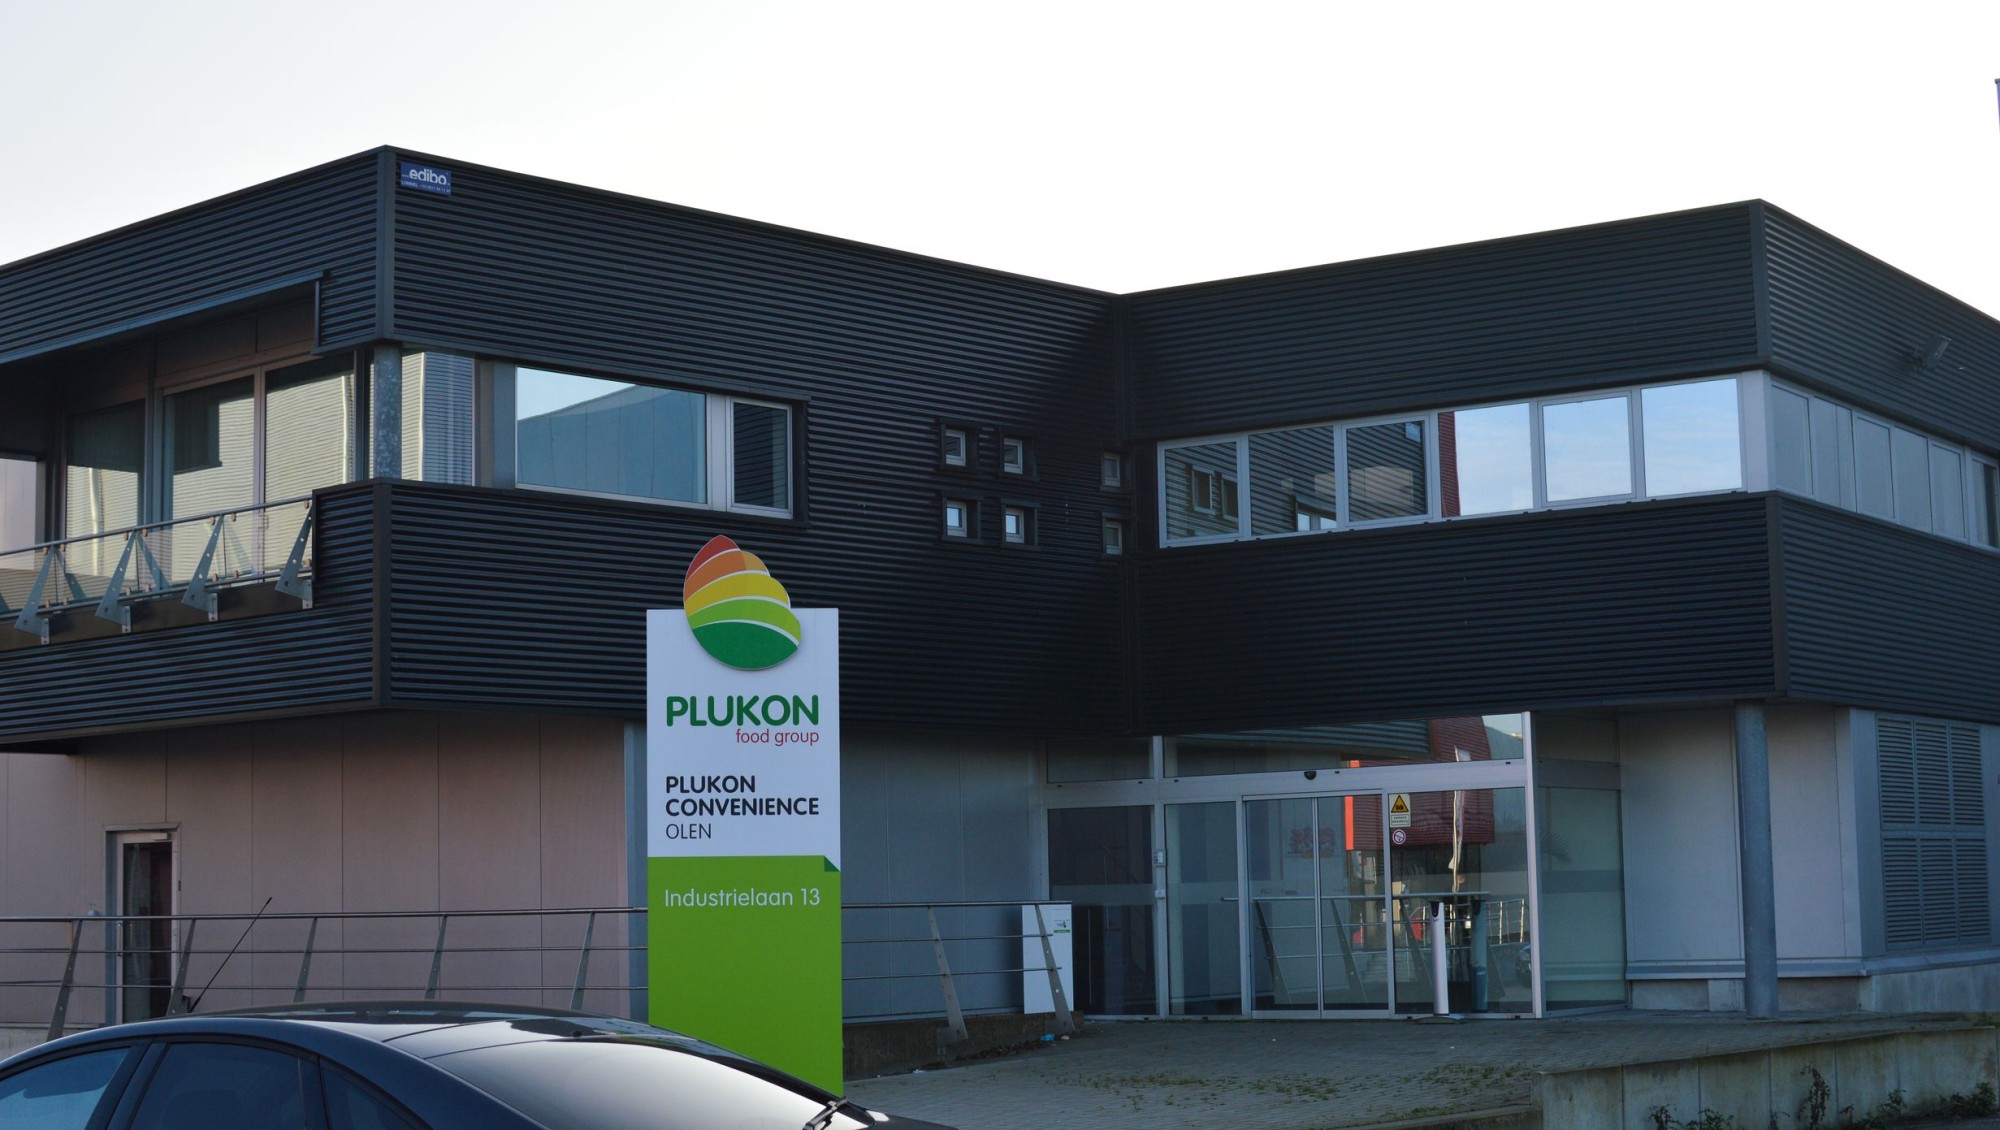 welcome to Plukon!